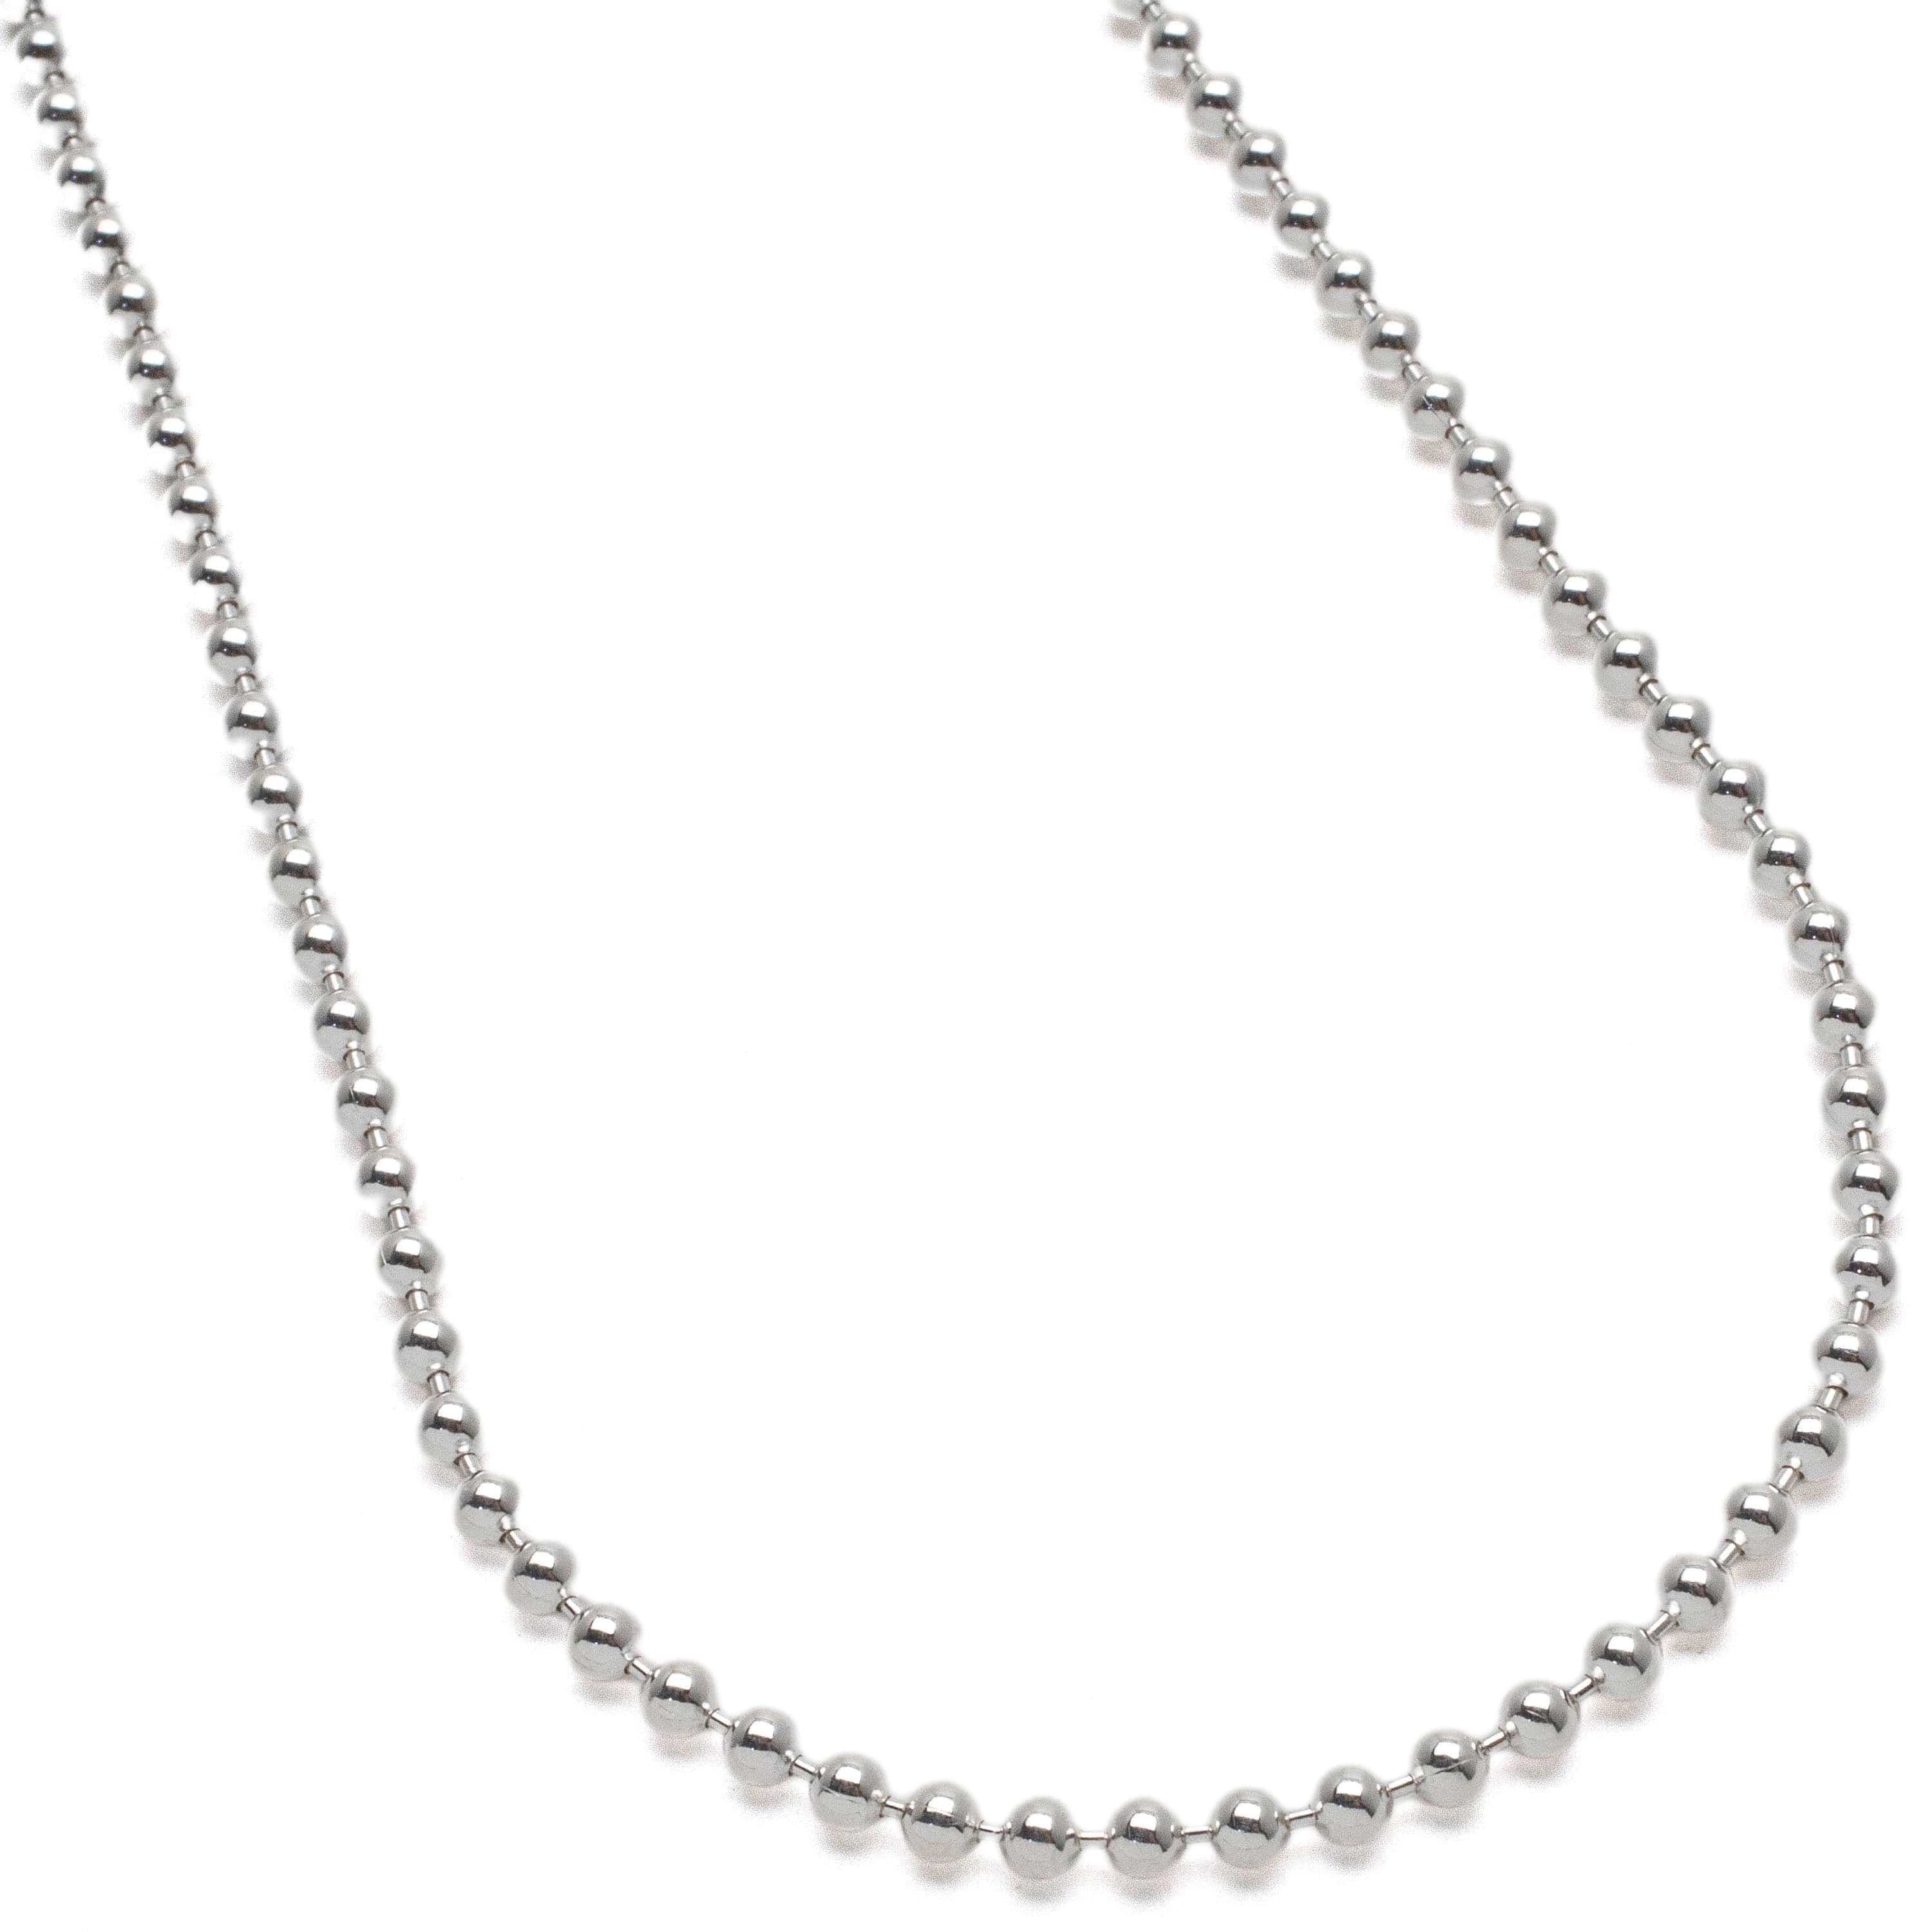 Kalifano Sterling Silver Chains 22" Italian Sterling Silver Round Beaded Chain Necklace 3mm SC-BD300-22